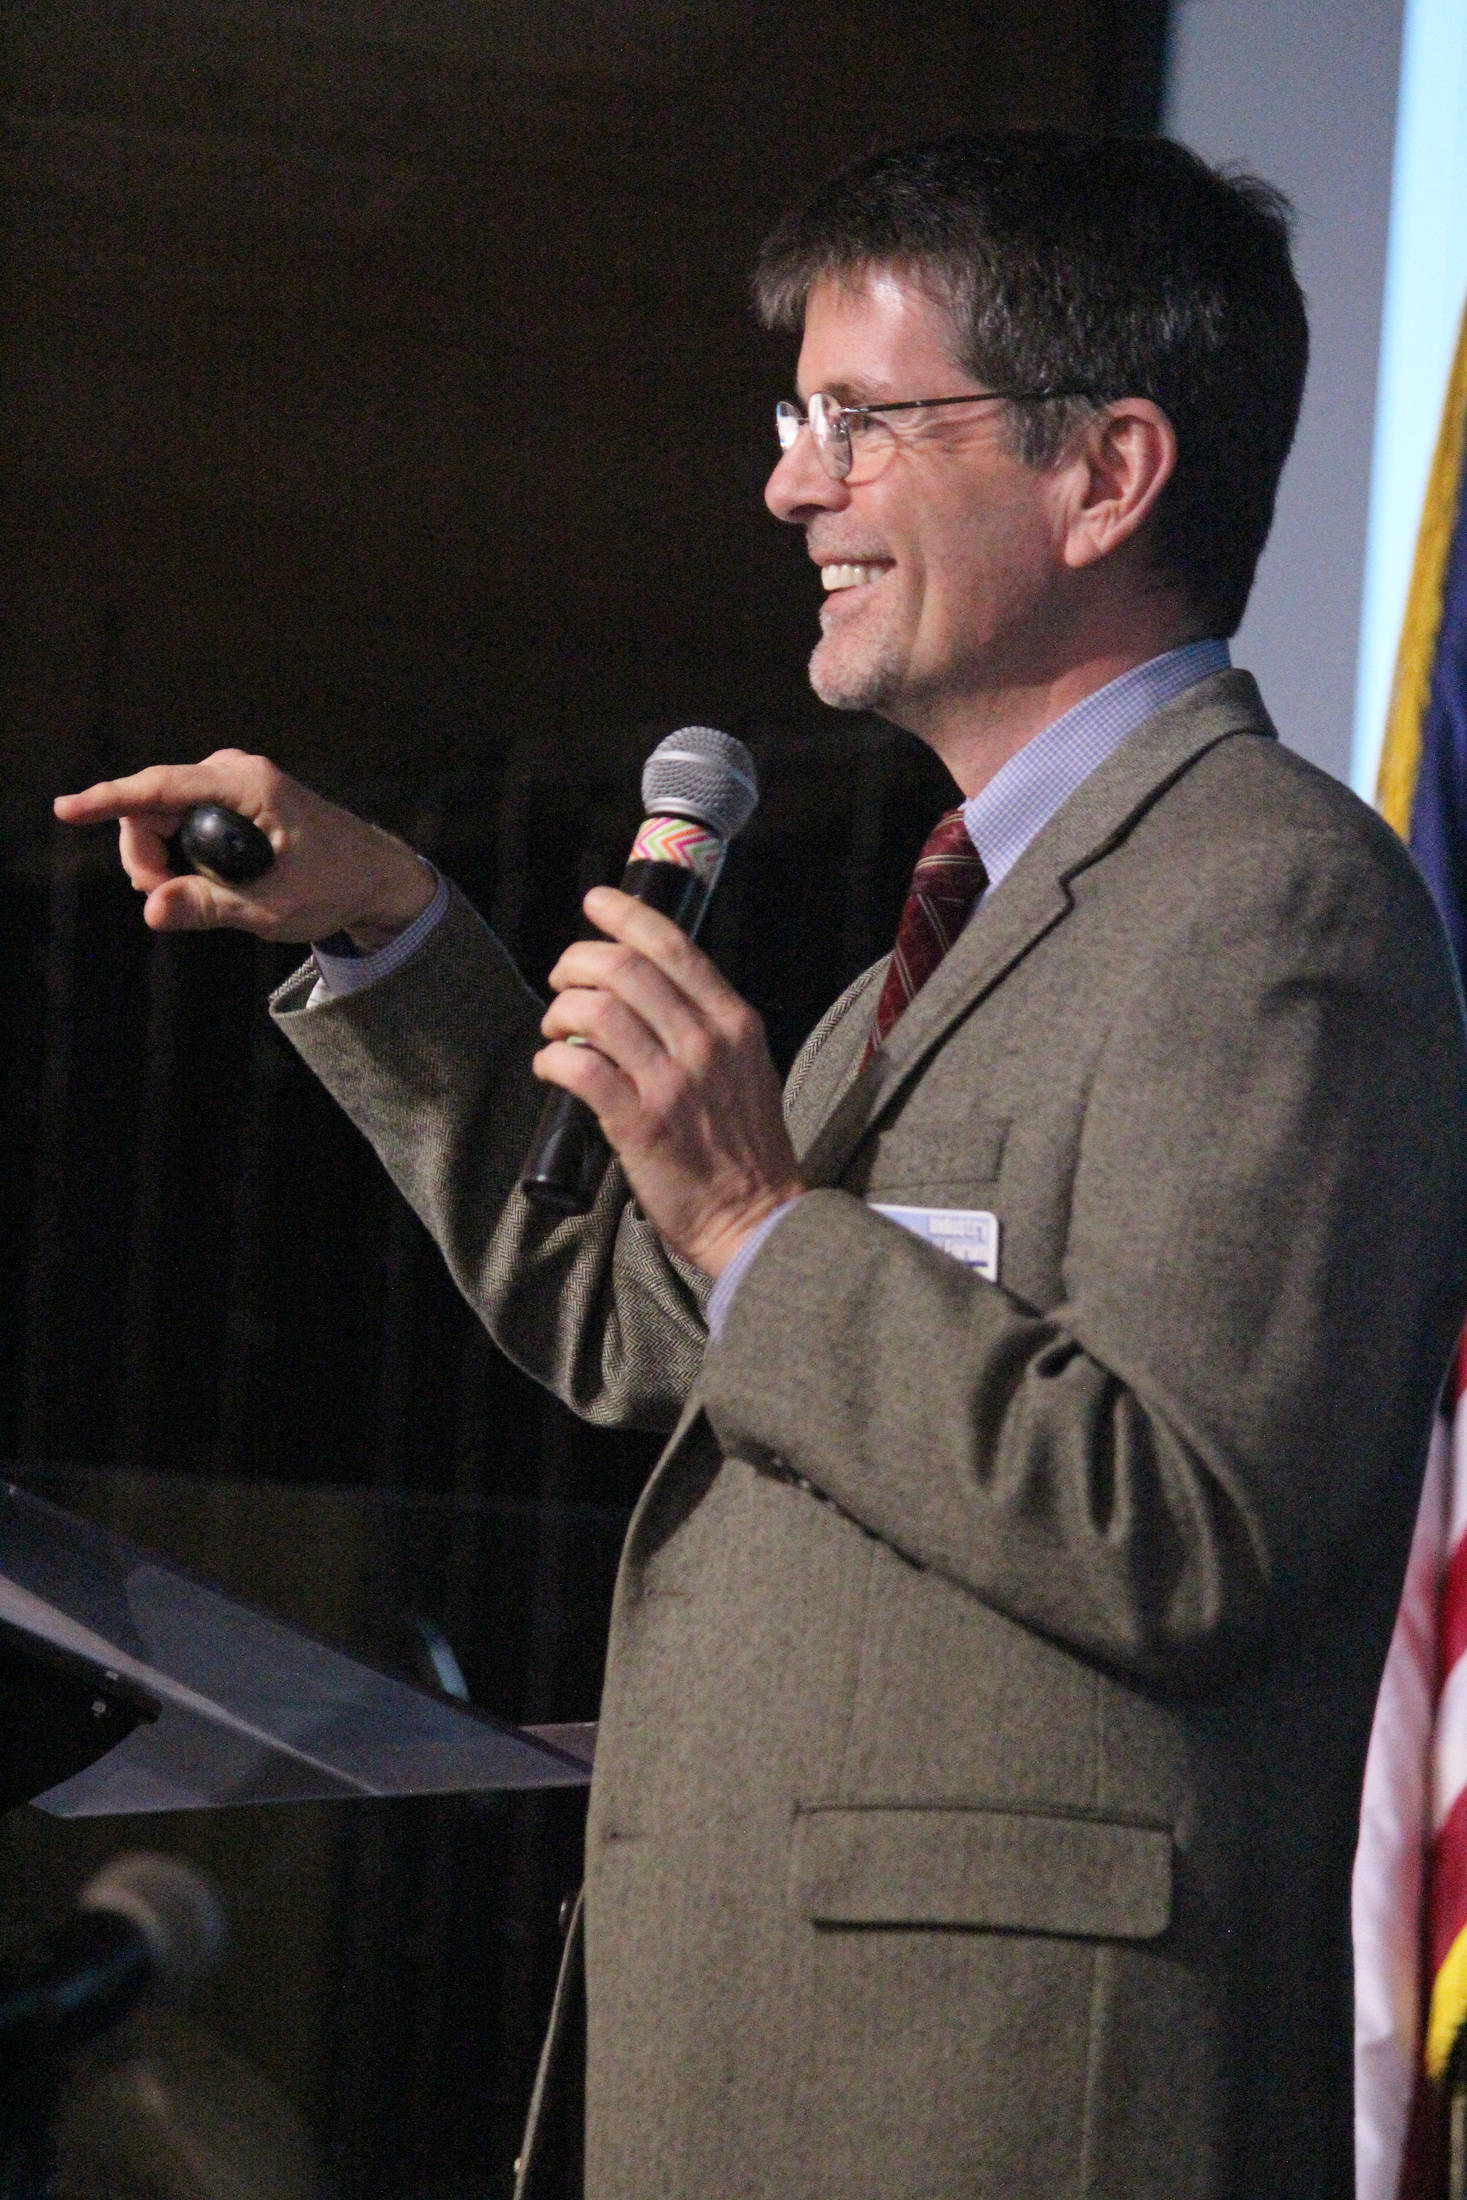 South Peninsula Hospital CEO Joe Woodin speaks to a crowd about the economics of medicine during the annual Industry Outlook Forum on Wednesday, Jan. 9, 2019 at Christian Community Church in Homer, Alaska. (Photo by Megan Pacer/Homer News)